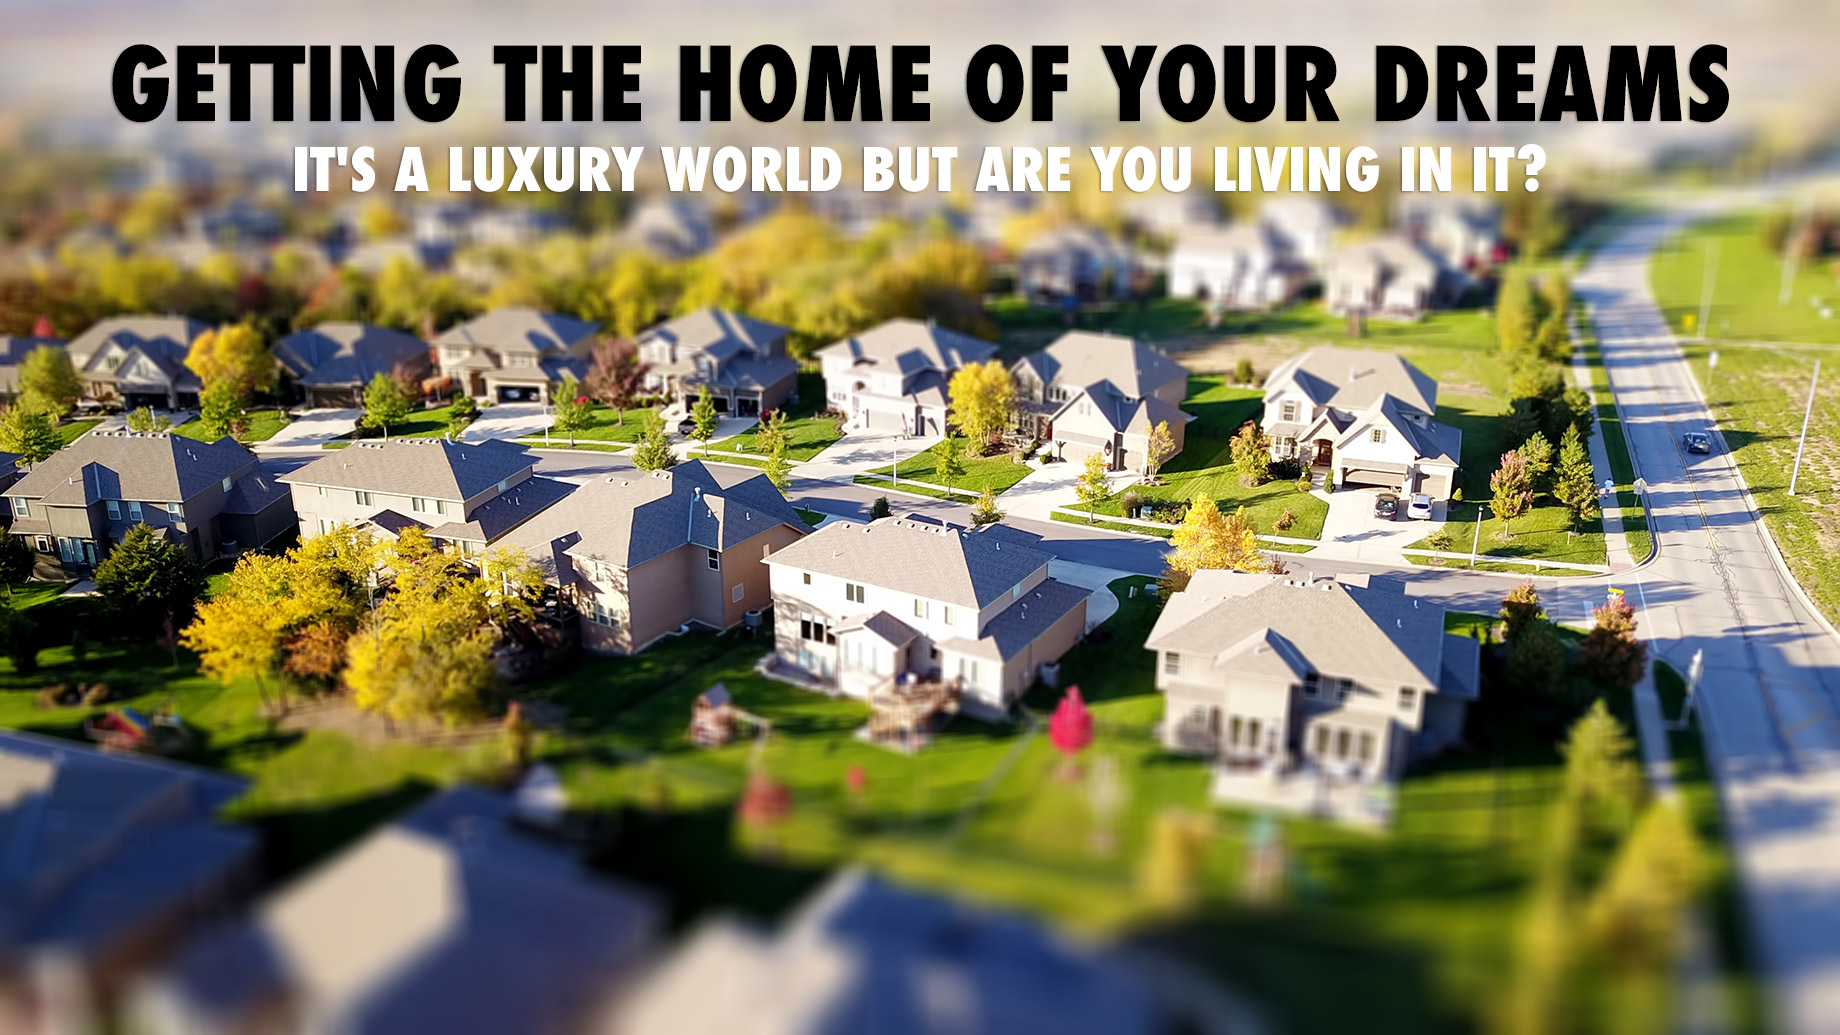 Getting The Home Of Your Dreams - It's A Luxury World But Are You Living In It?